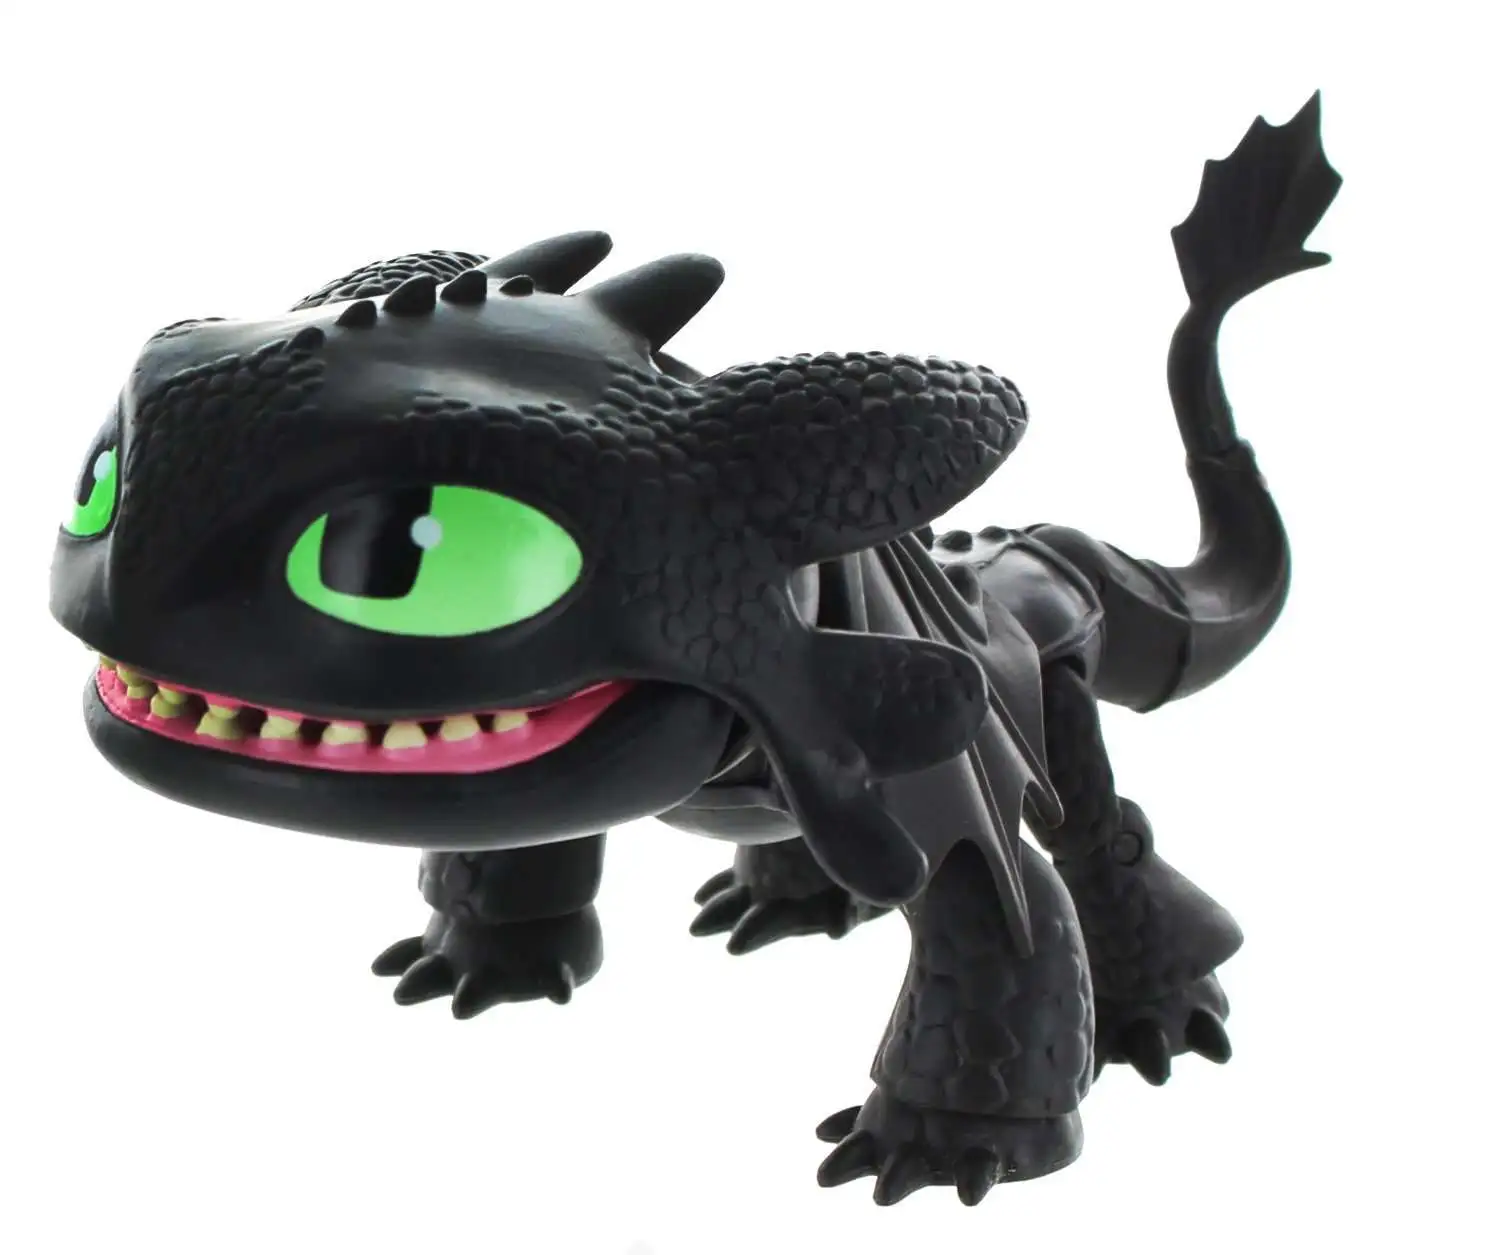 How to Train Your Dragon Action Vinyls Toothless Vinyl Figure The